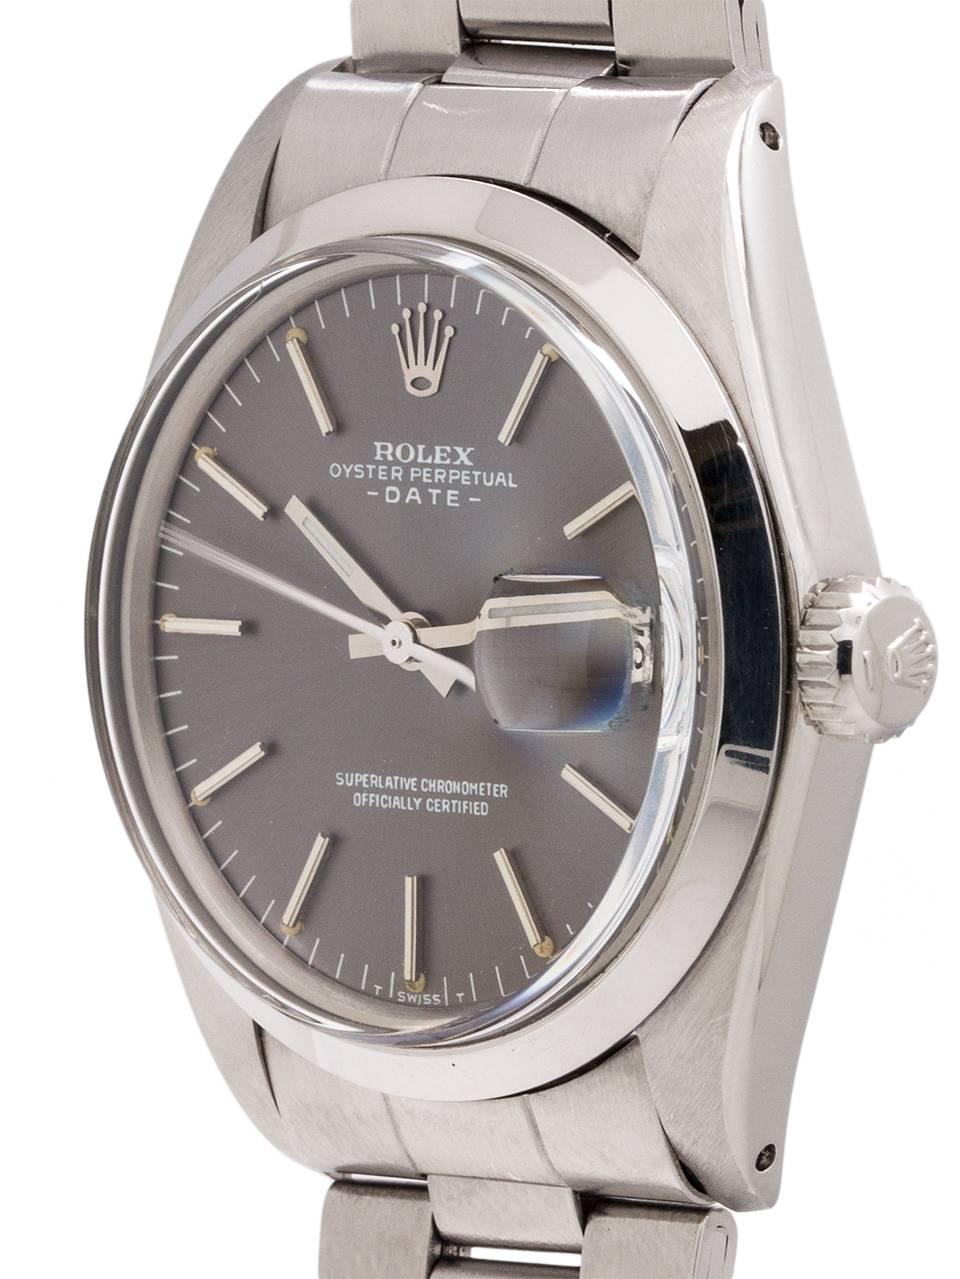 
Rolex Oyster Perpetual Date ref 1500 serial # 2.7 million circa 1970. Featuring a 34mm diameter stainless steel case with smooth bezel and scarce original gray dial. Powered by self winding calibre 1570 movement with sweep seconds and date. With